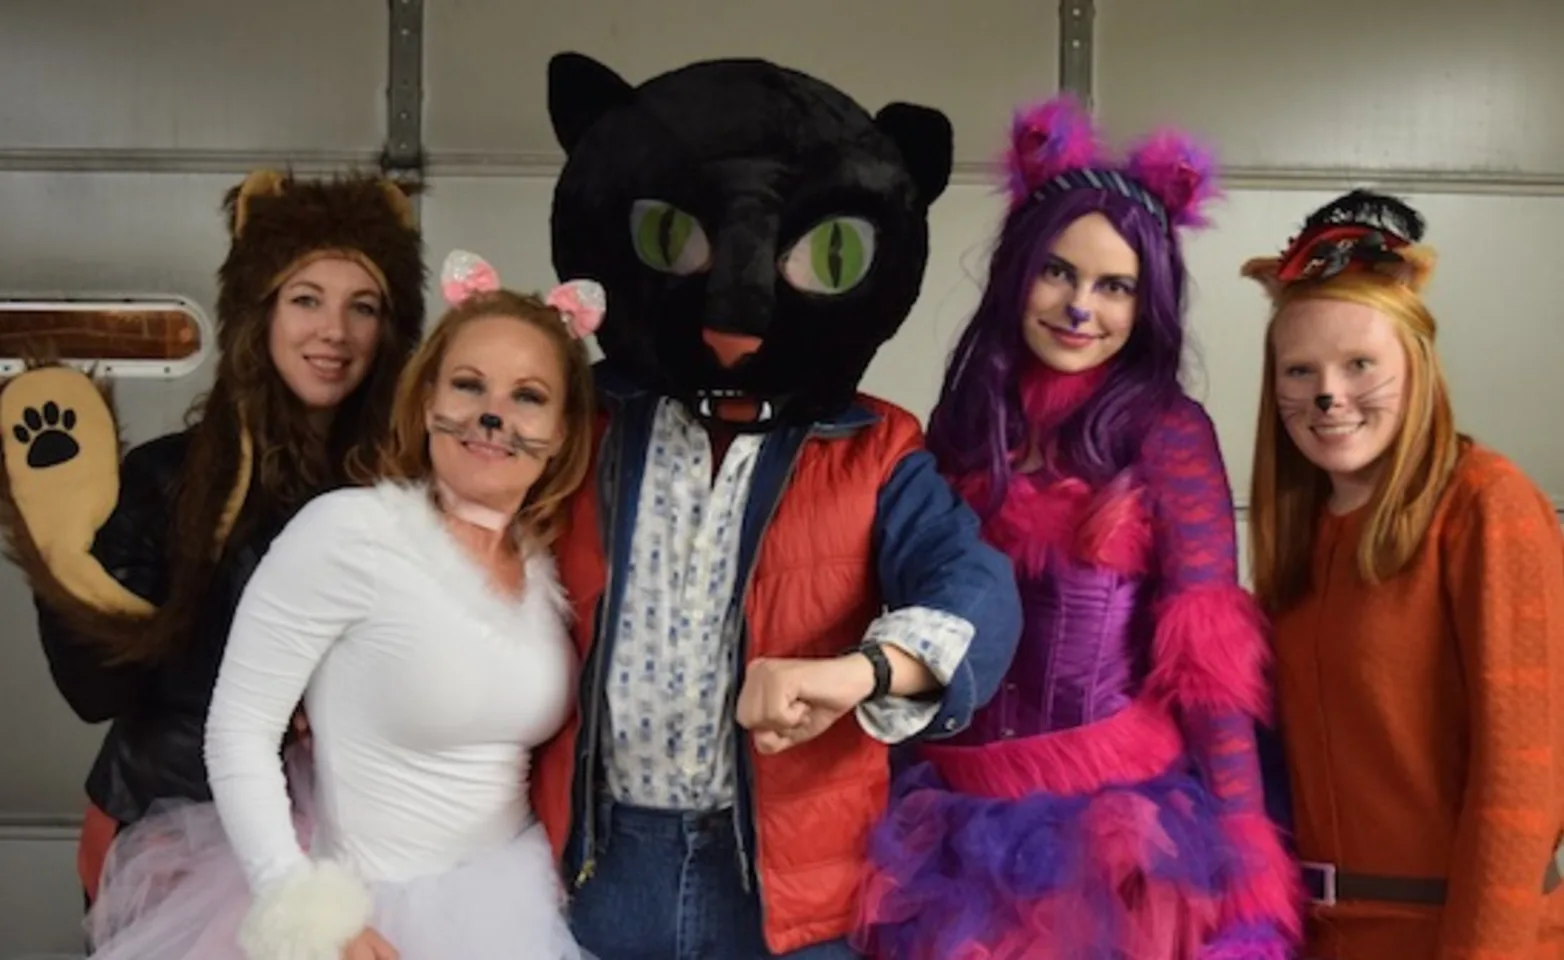 People wearing cat themed costumes